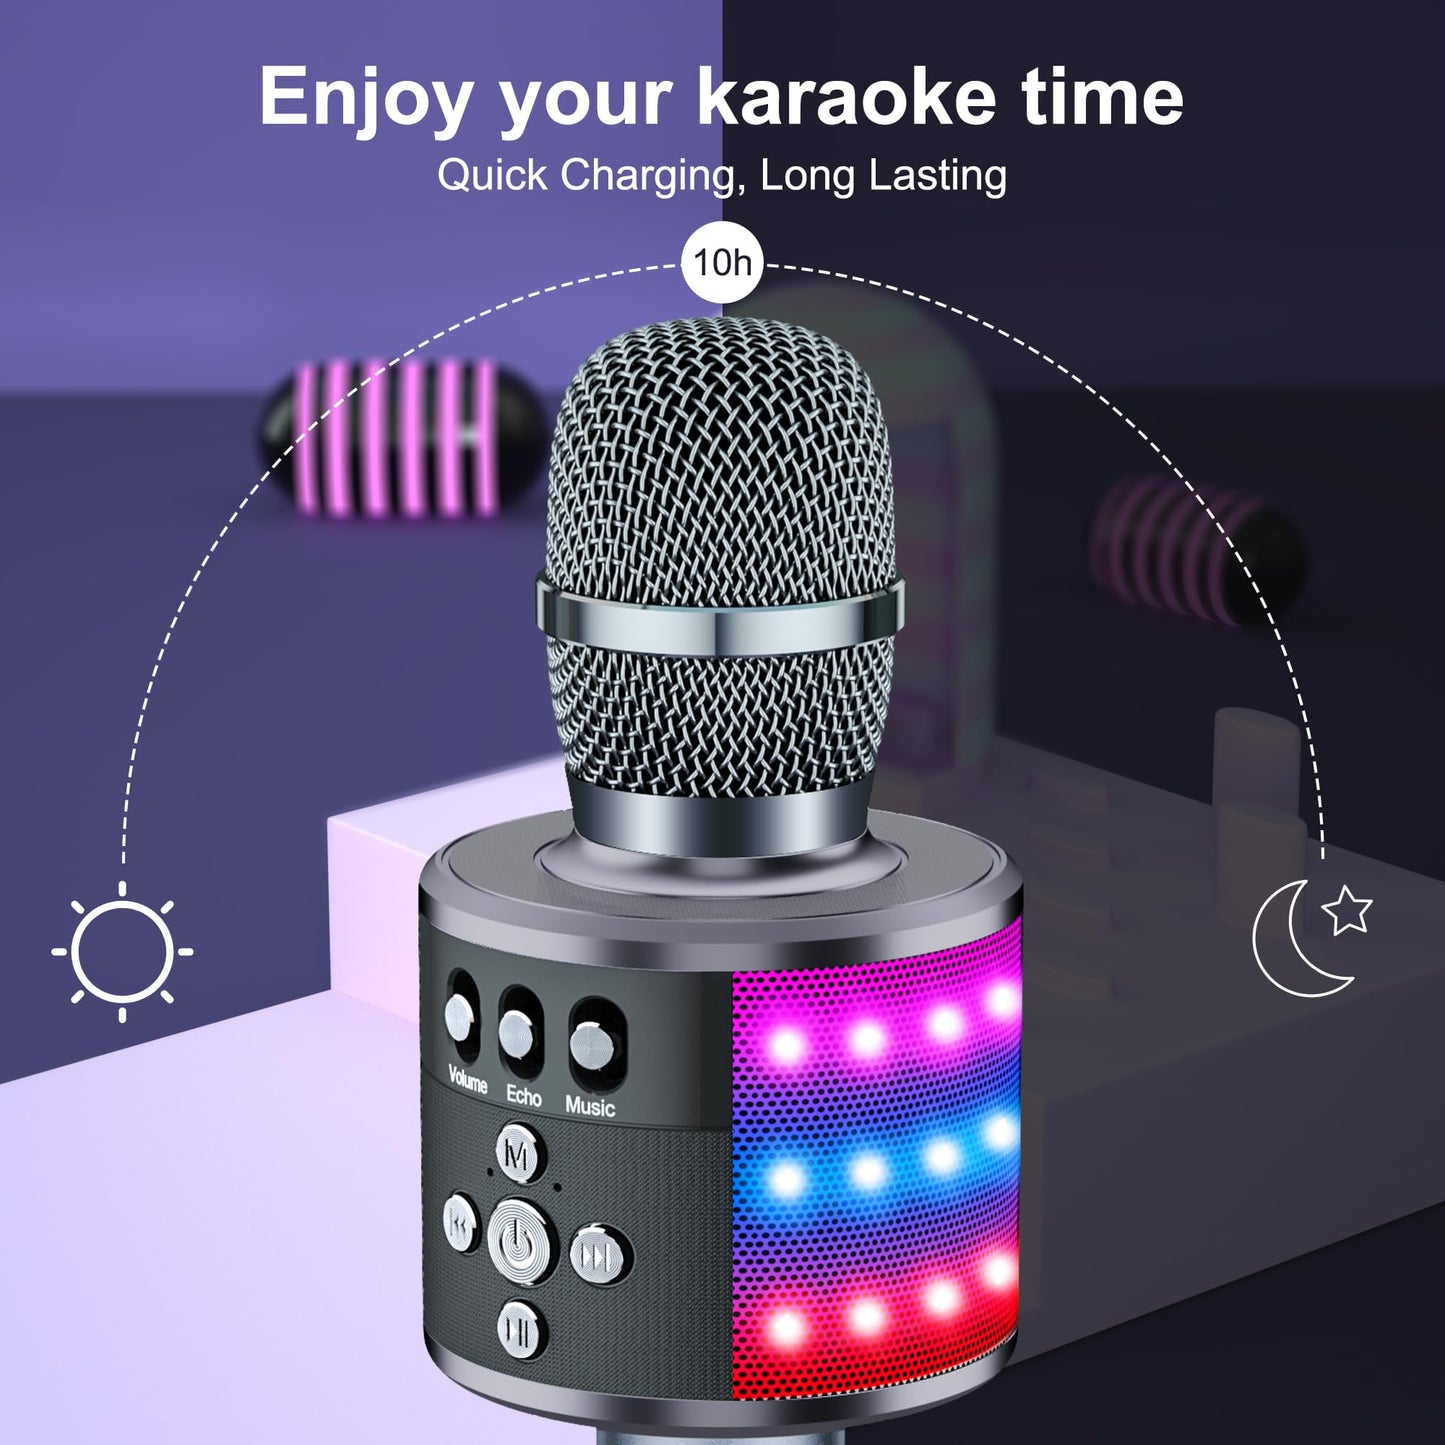 BONAOK Bluetooth Wireless Karaoke Microphone with LED Lights,4-in-1 Portable Handheld Mic with Speaker Karaoke Player for Singing Home Party Toys Birthday Gift for Kids Adults Q78(Rose Gold)